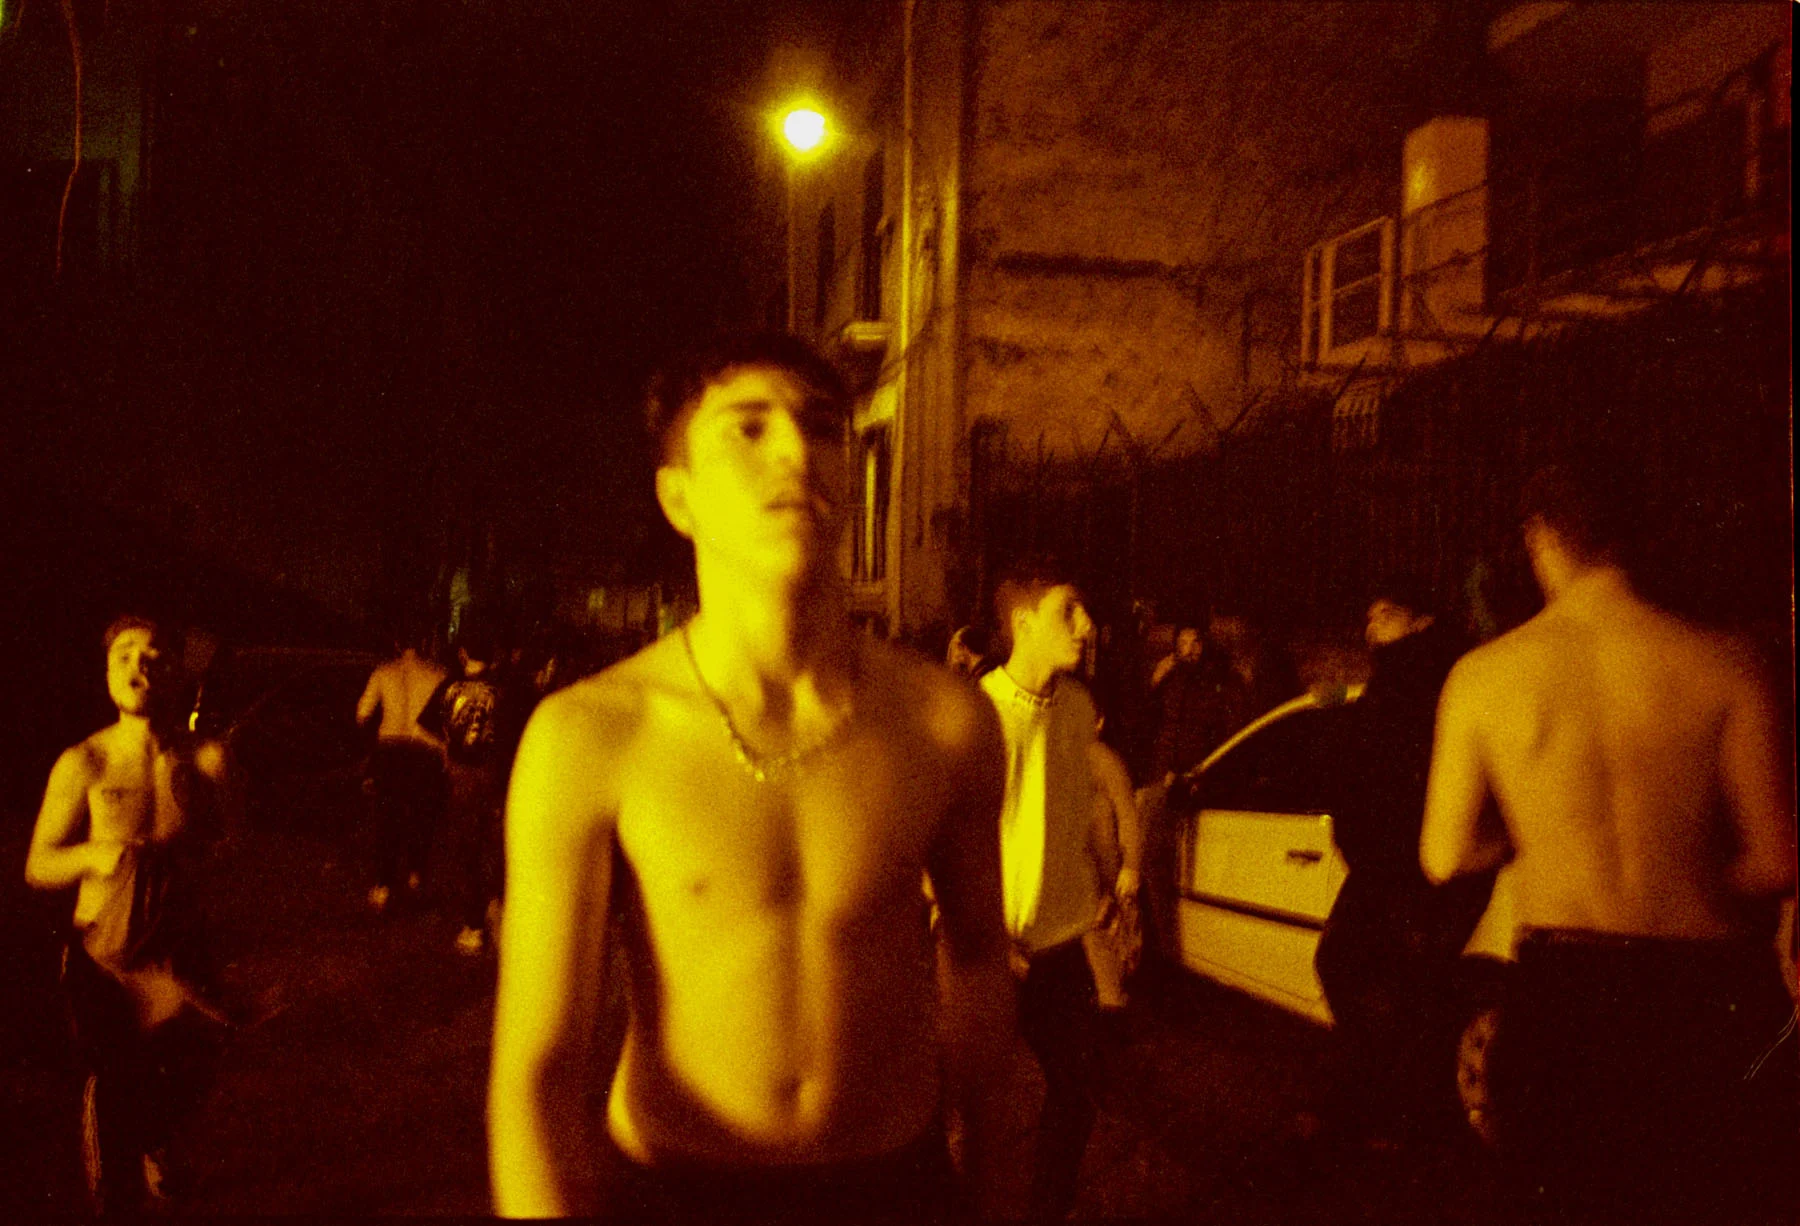 A photo of a group of teenage boys playing in the street at night